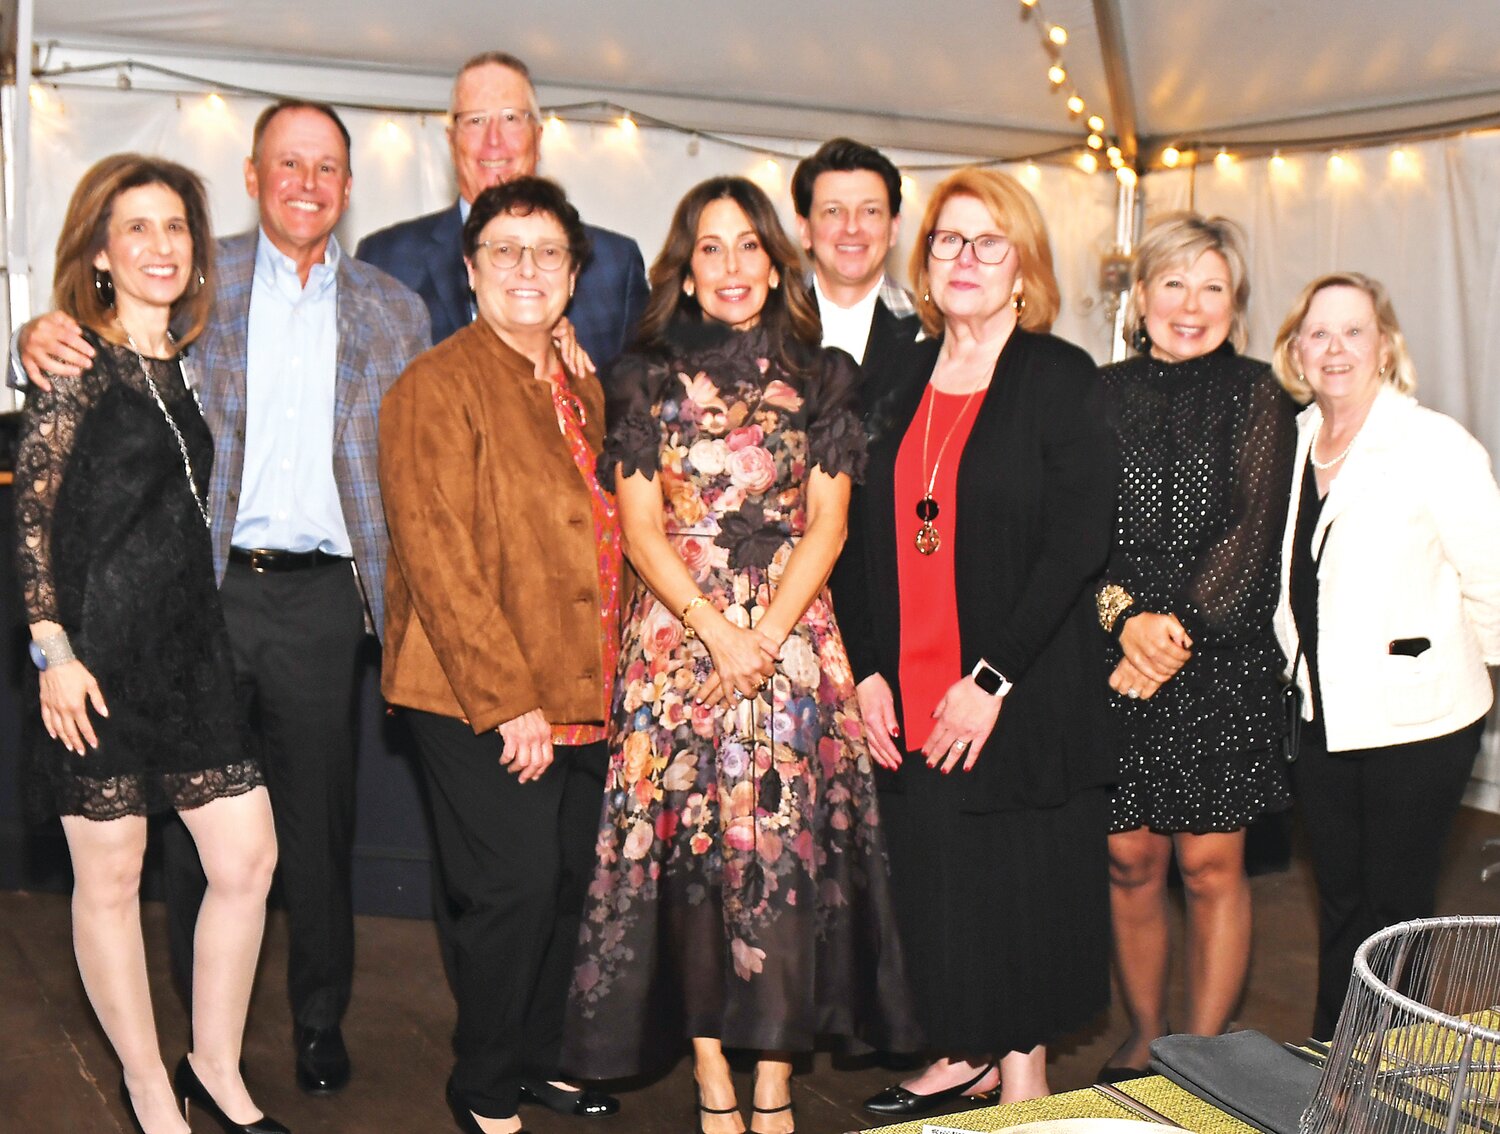 Inspiration Award winner Nicole Dresnin Schaeffer and board of directors members from Cancer Support Community Greater Philadelphia gather at the 30th anniversary celebration of the organization.